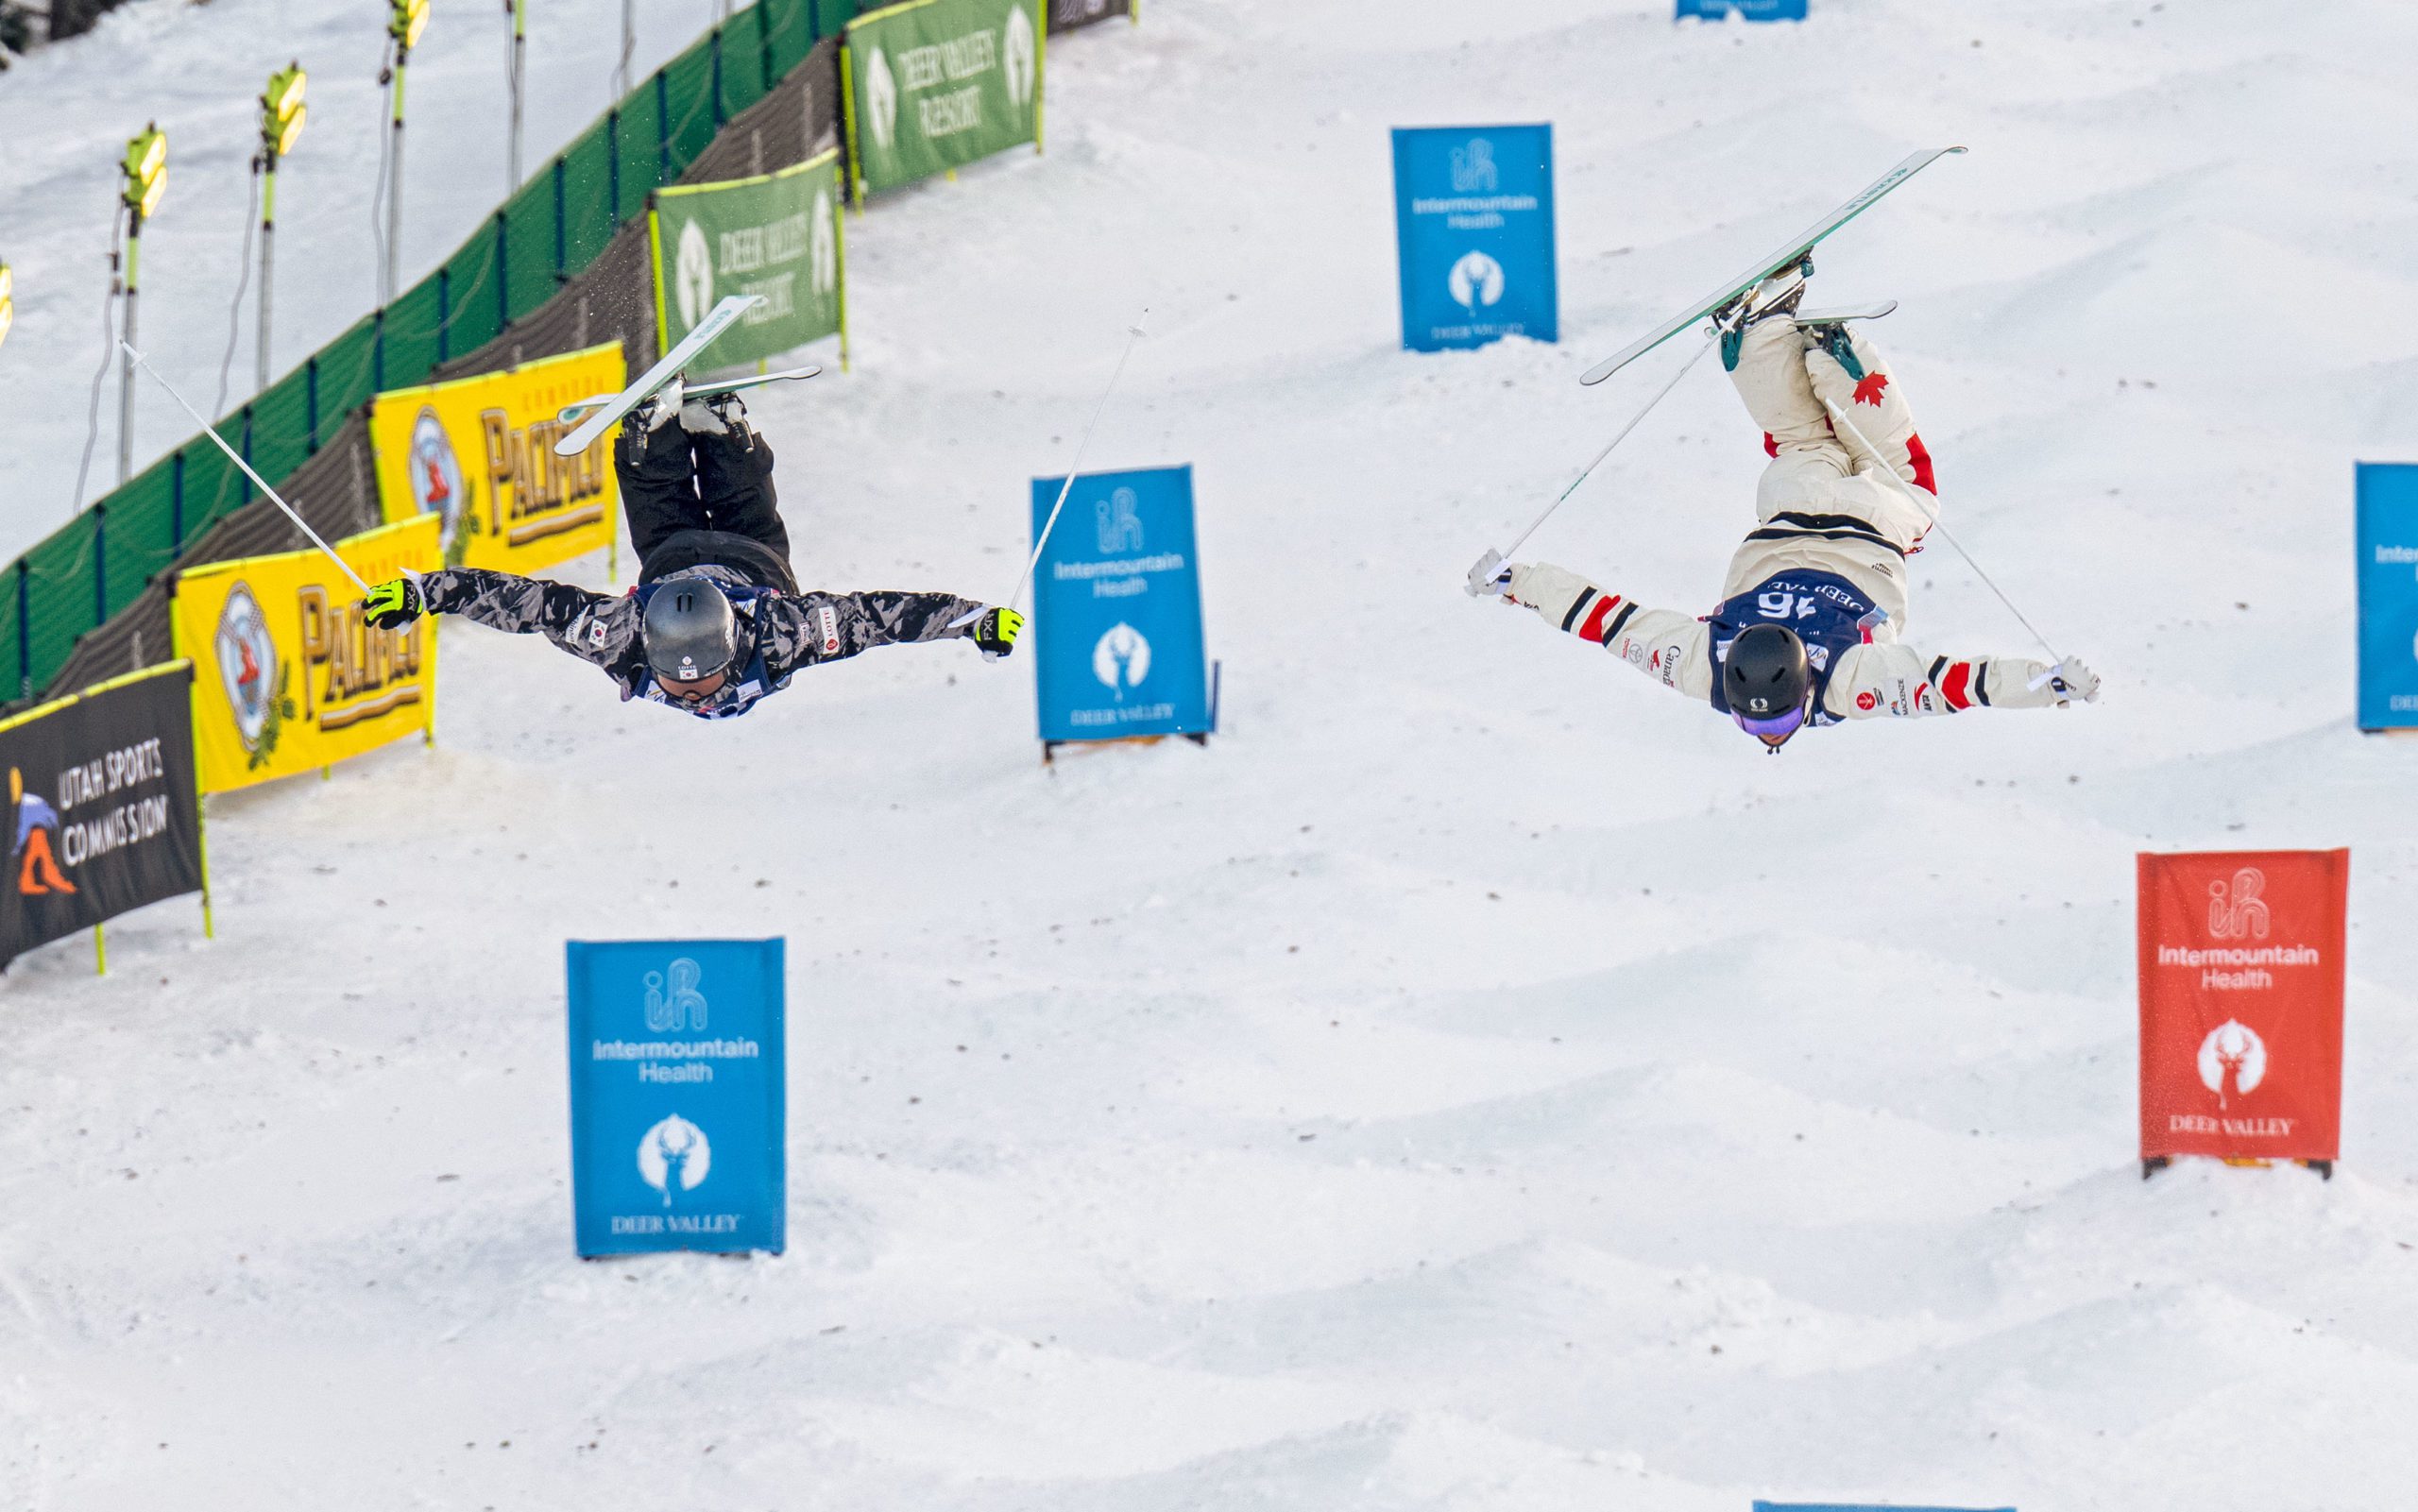 Daeyoon Jung of South Korea and Julien Viel of France in a qualifier dual moguls run.